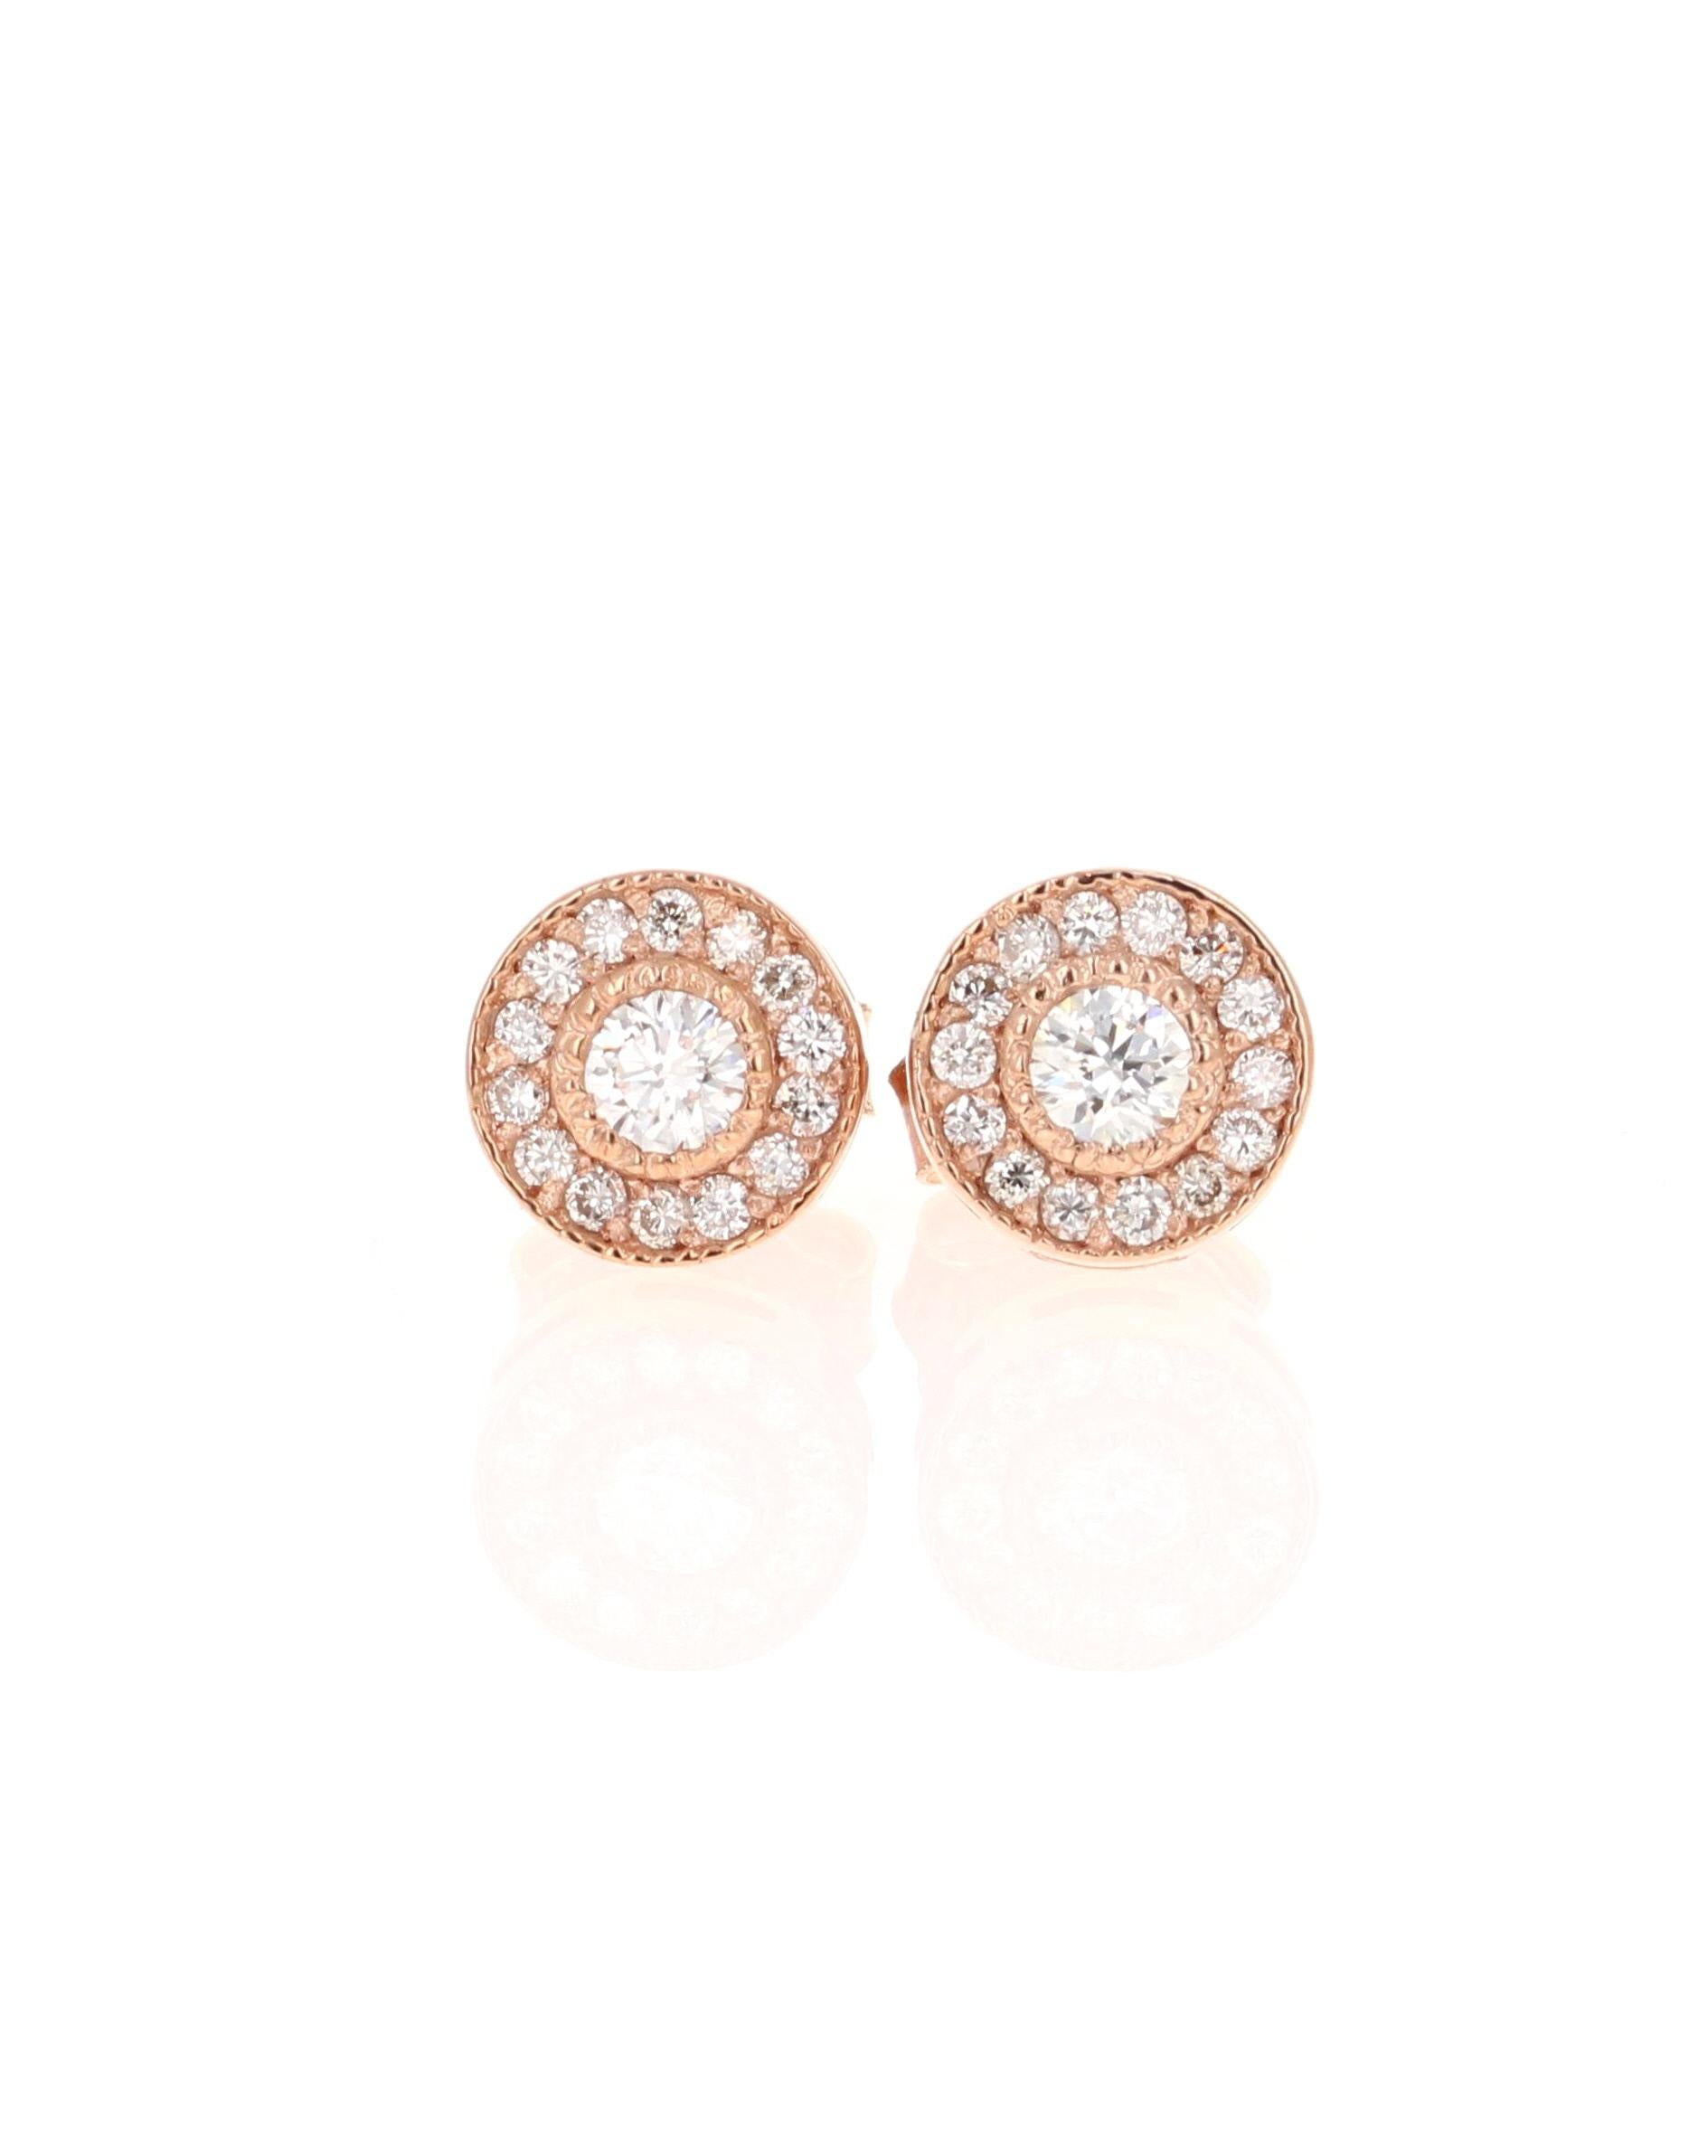 This unqiue design of diamond earrings has 30 Round Cut Diamonds that have 0.30 carats and a clarity and color of VS-H. 
They are set in 14 Karat Rose Gold and weigh 1.2 grams

The width of the earrings are 7 mm. 



